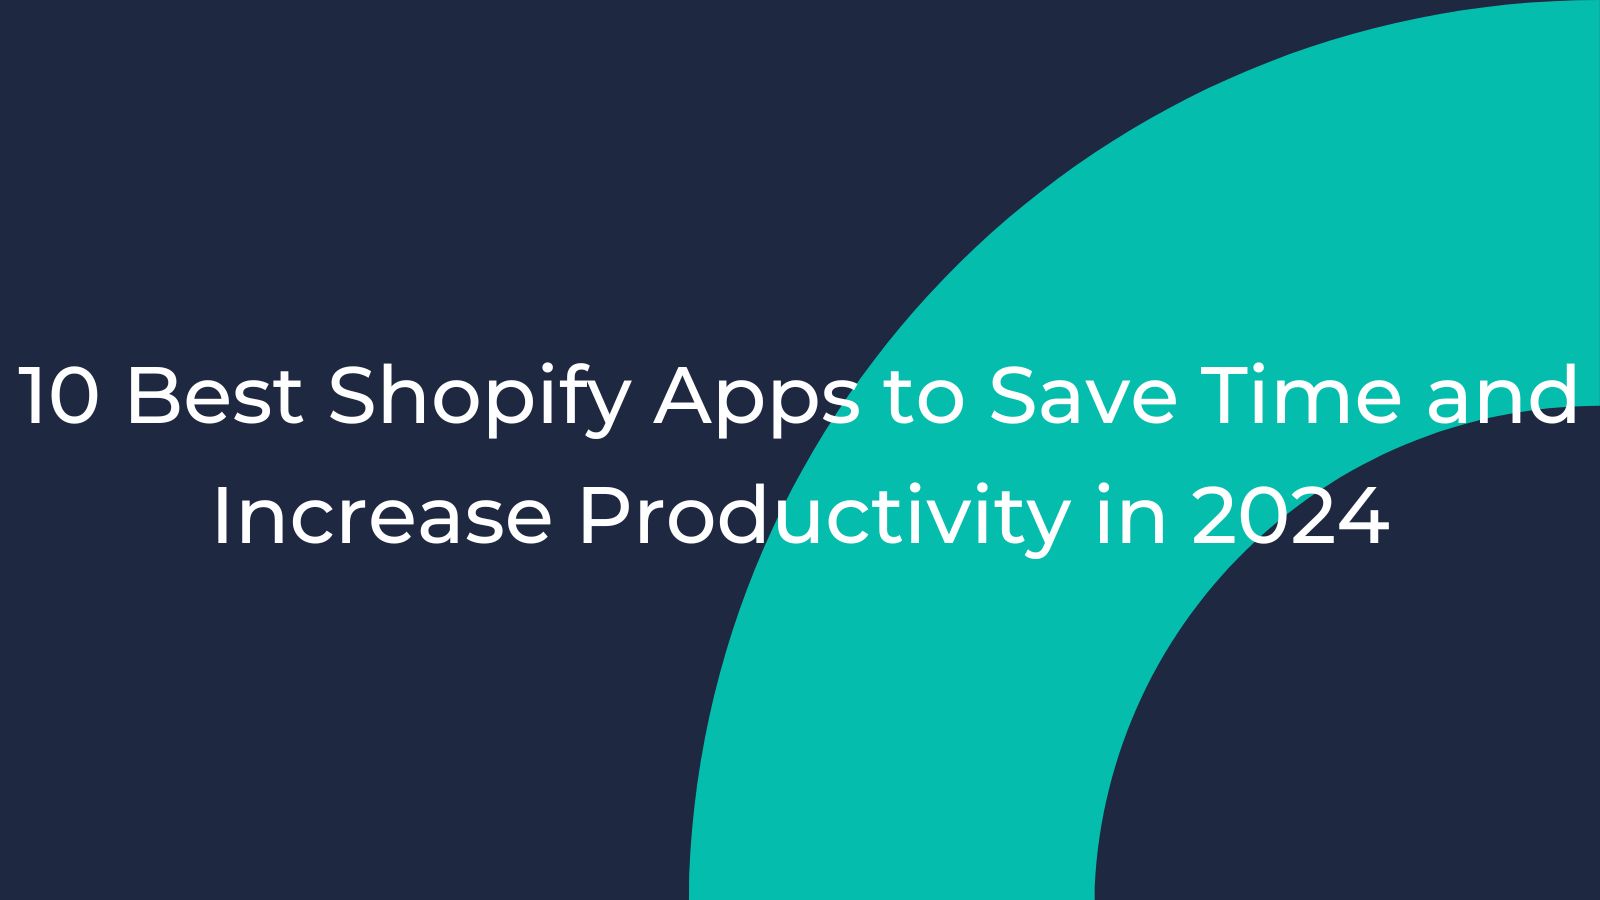 10 Best Shopify Apps to Save Time and Increase Productivity in 2024